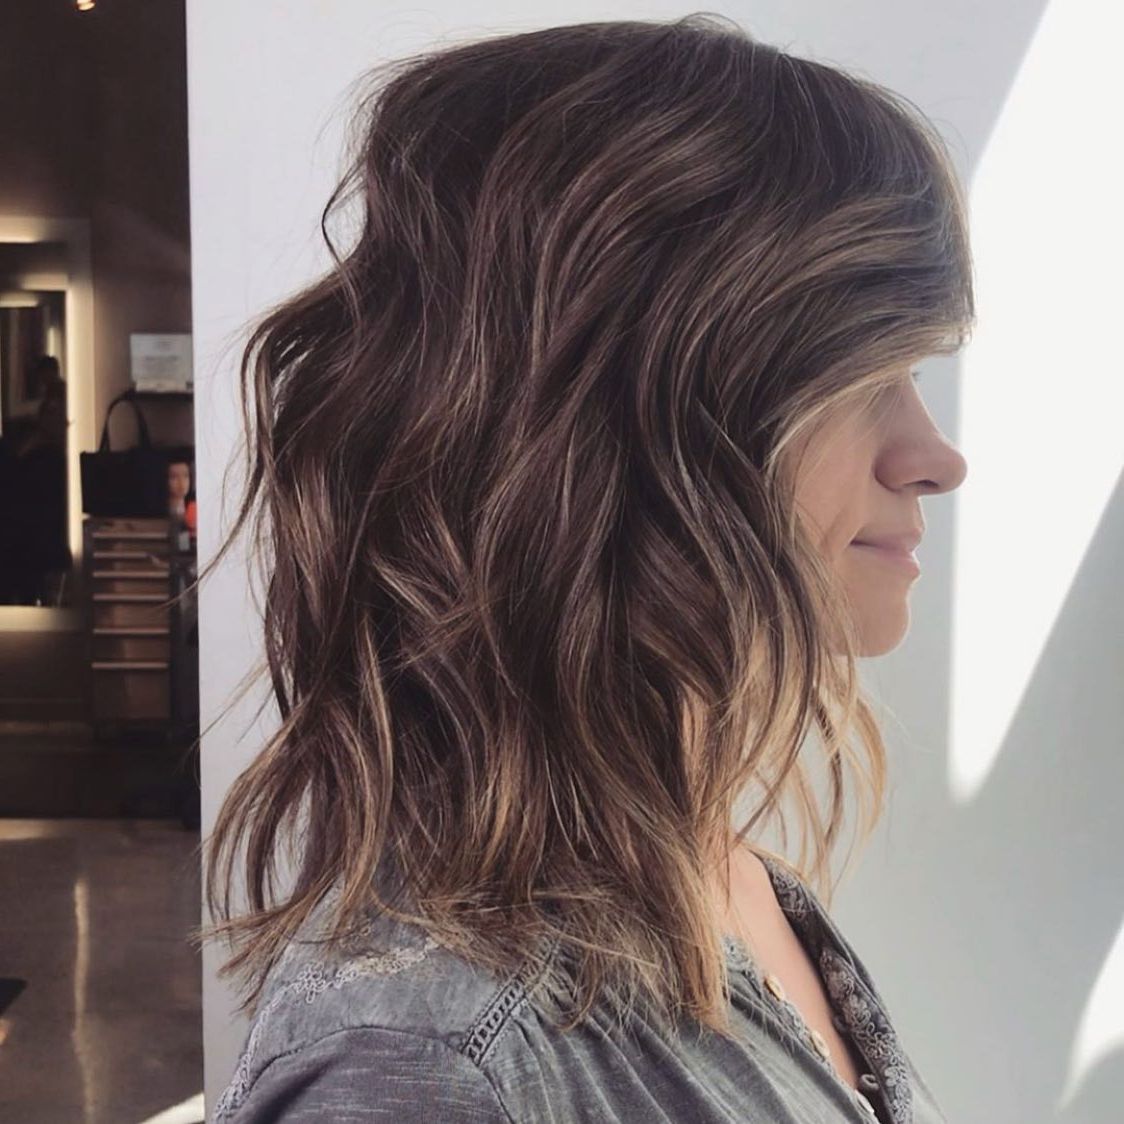 25+ Shoulder Length Haircuts With Layers For Women With Widely Used Below The Shoulders Textured Haircut (Gallery 14 of 20)